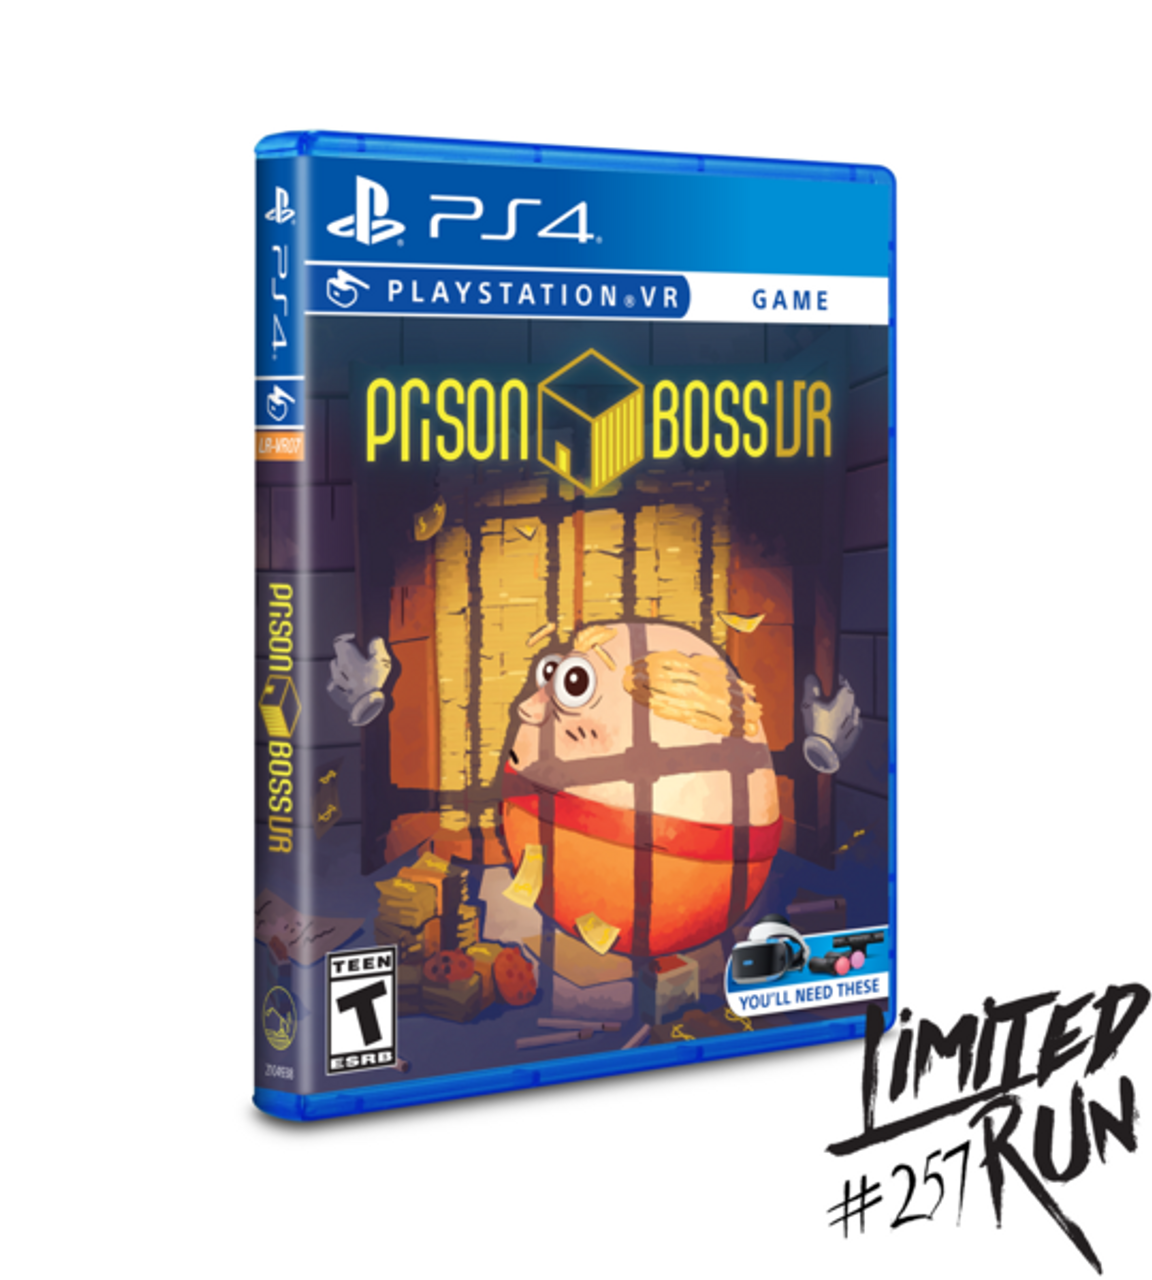 Prison Boss VR - Run for PlayStation 4 available at